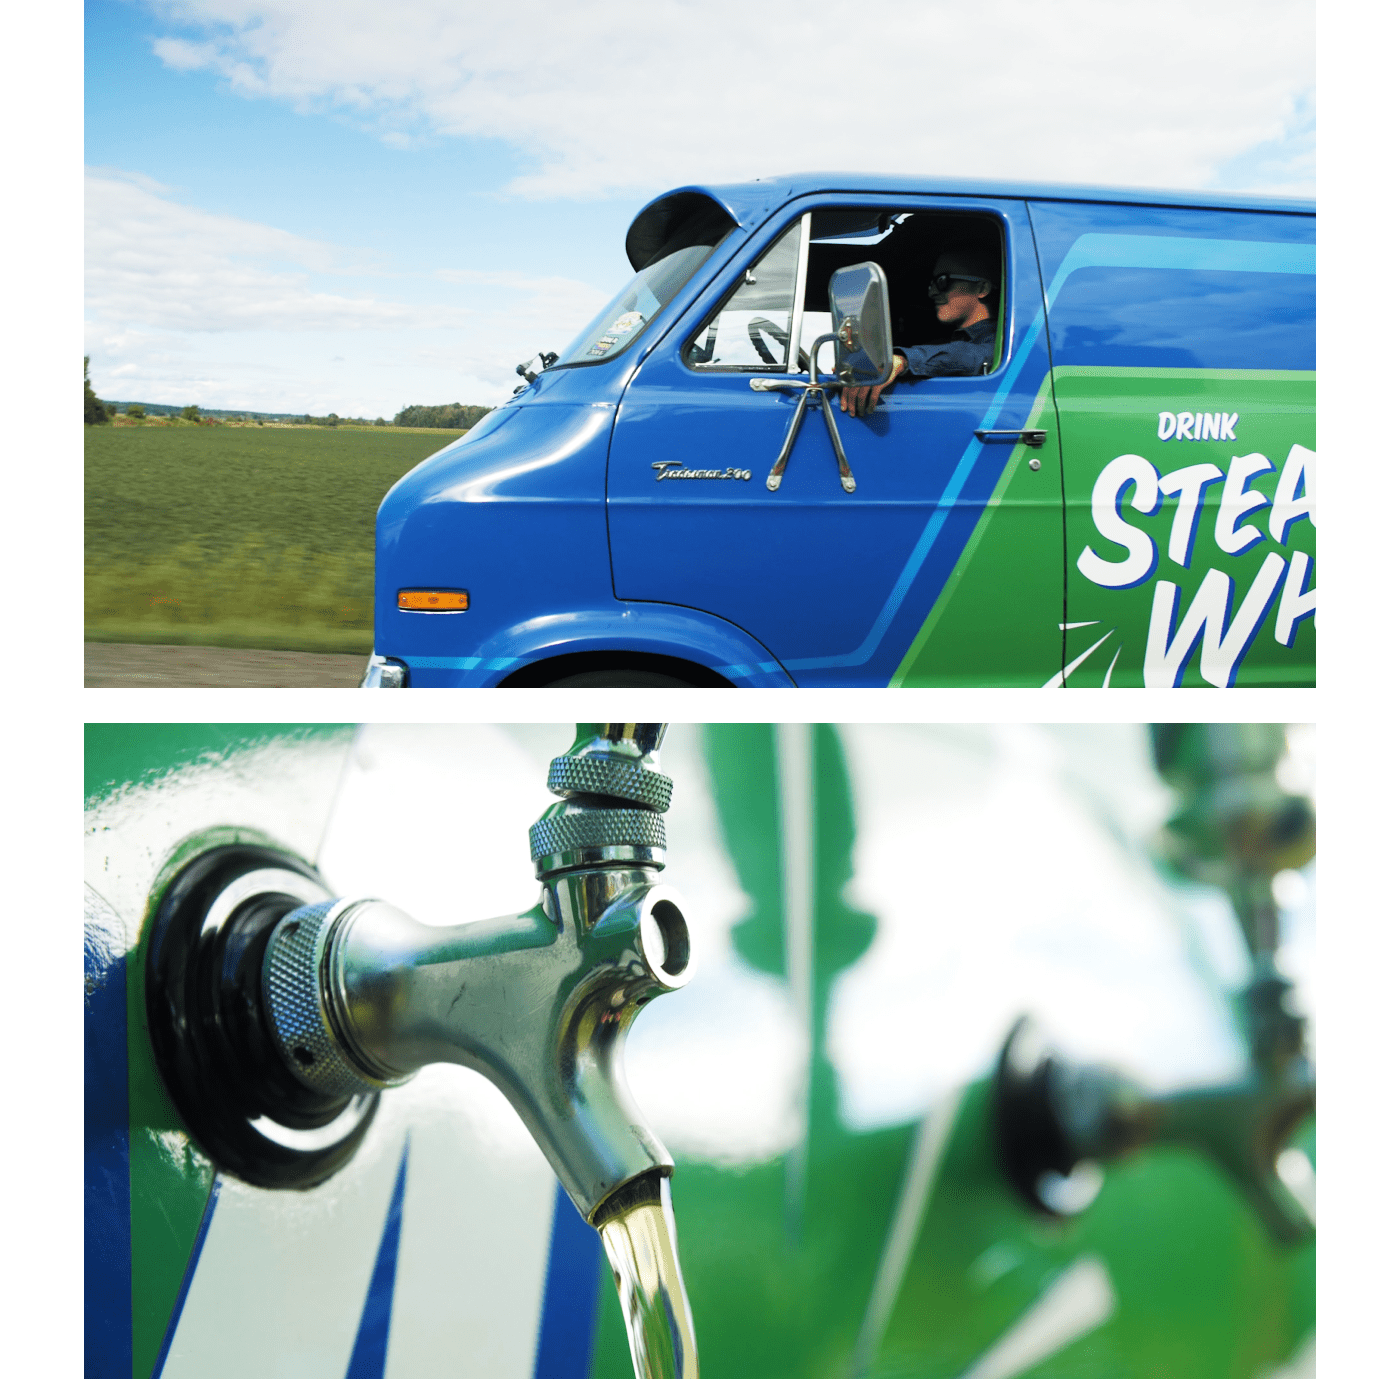 Production Steam Whistle video beer Beer Event On the road Promotional Event